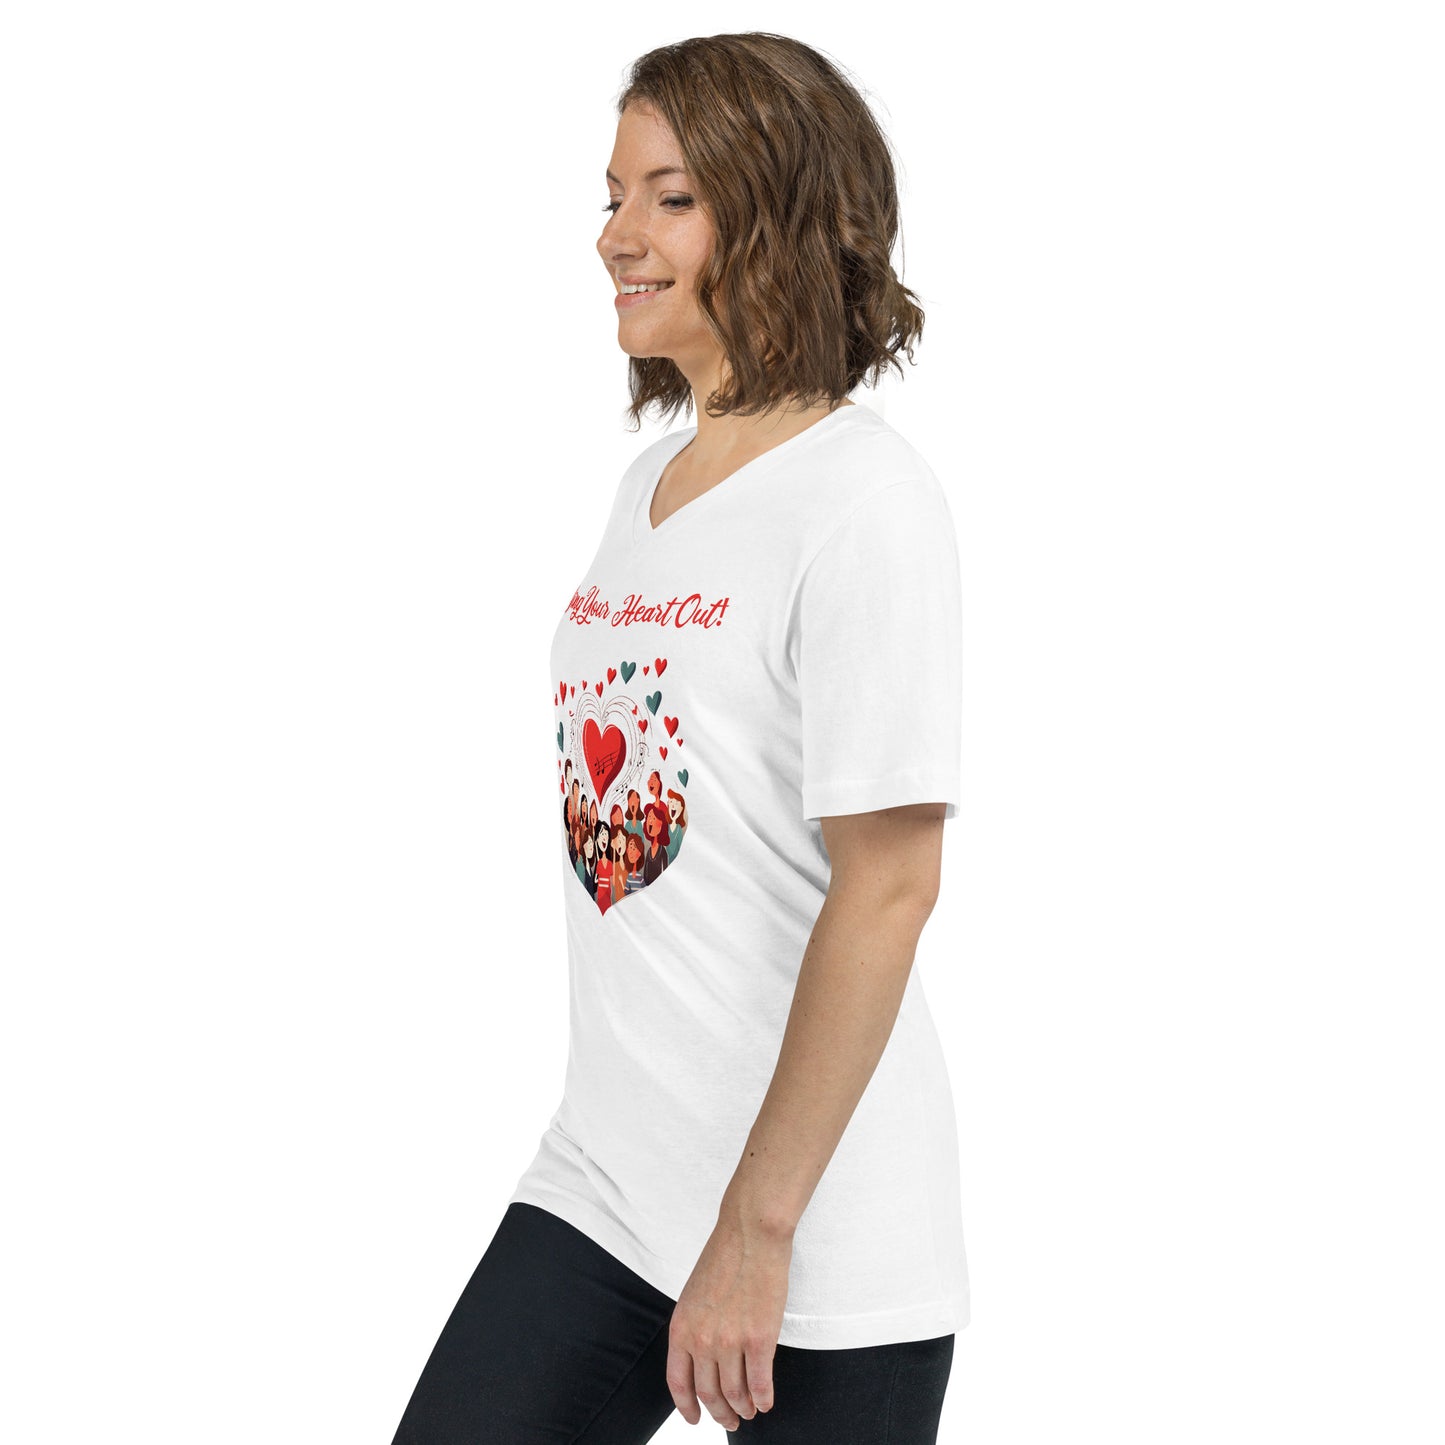 Sing Your Heart Out - Unisex Short Sleeve V-Neck T-Shirt